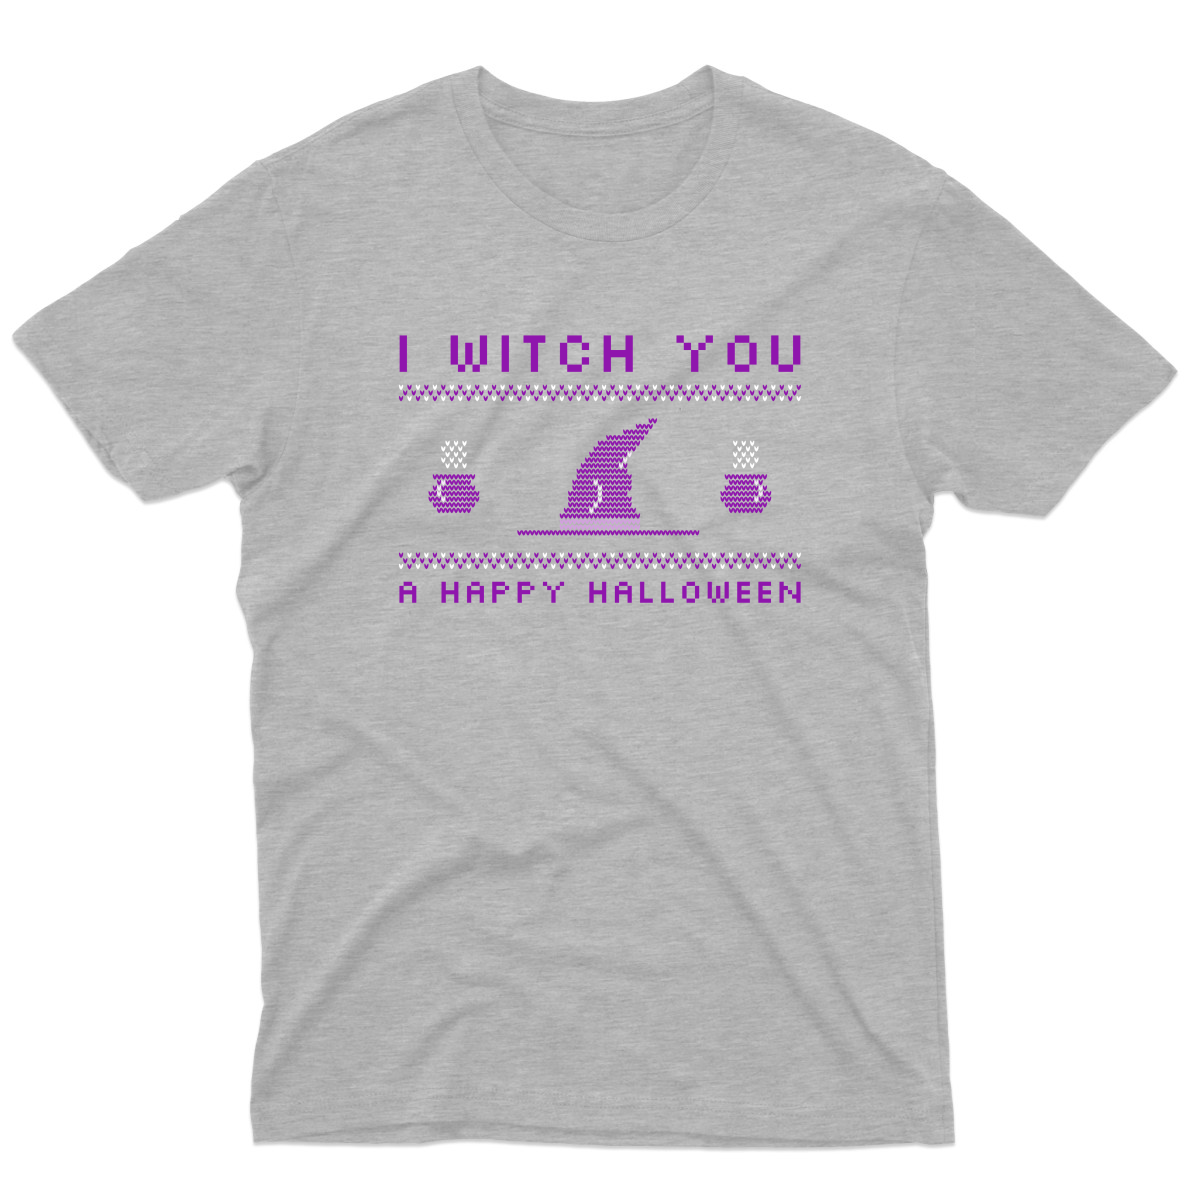 I Witch You a Happy Halloween Men's T-shirt | Gray